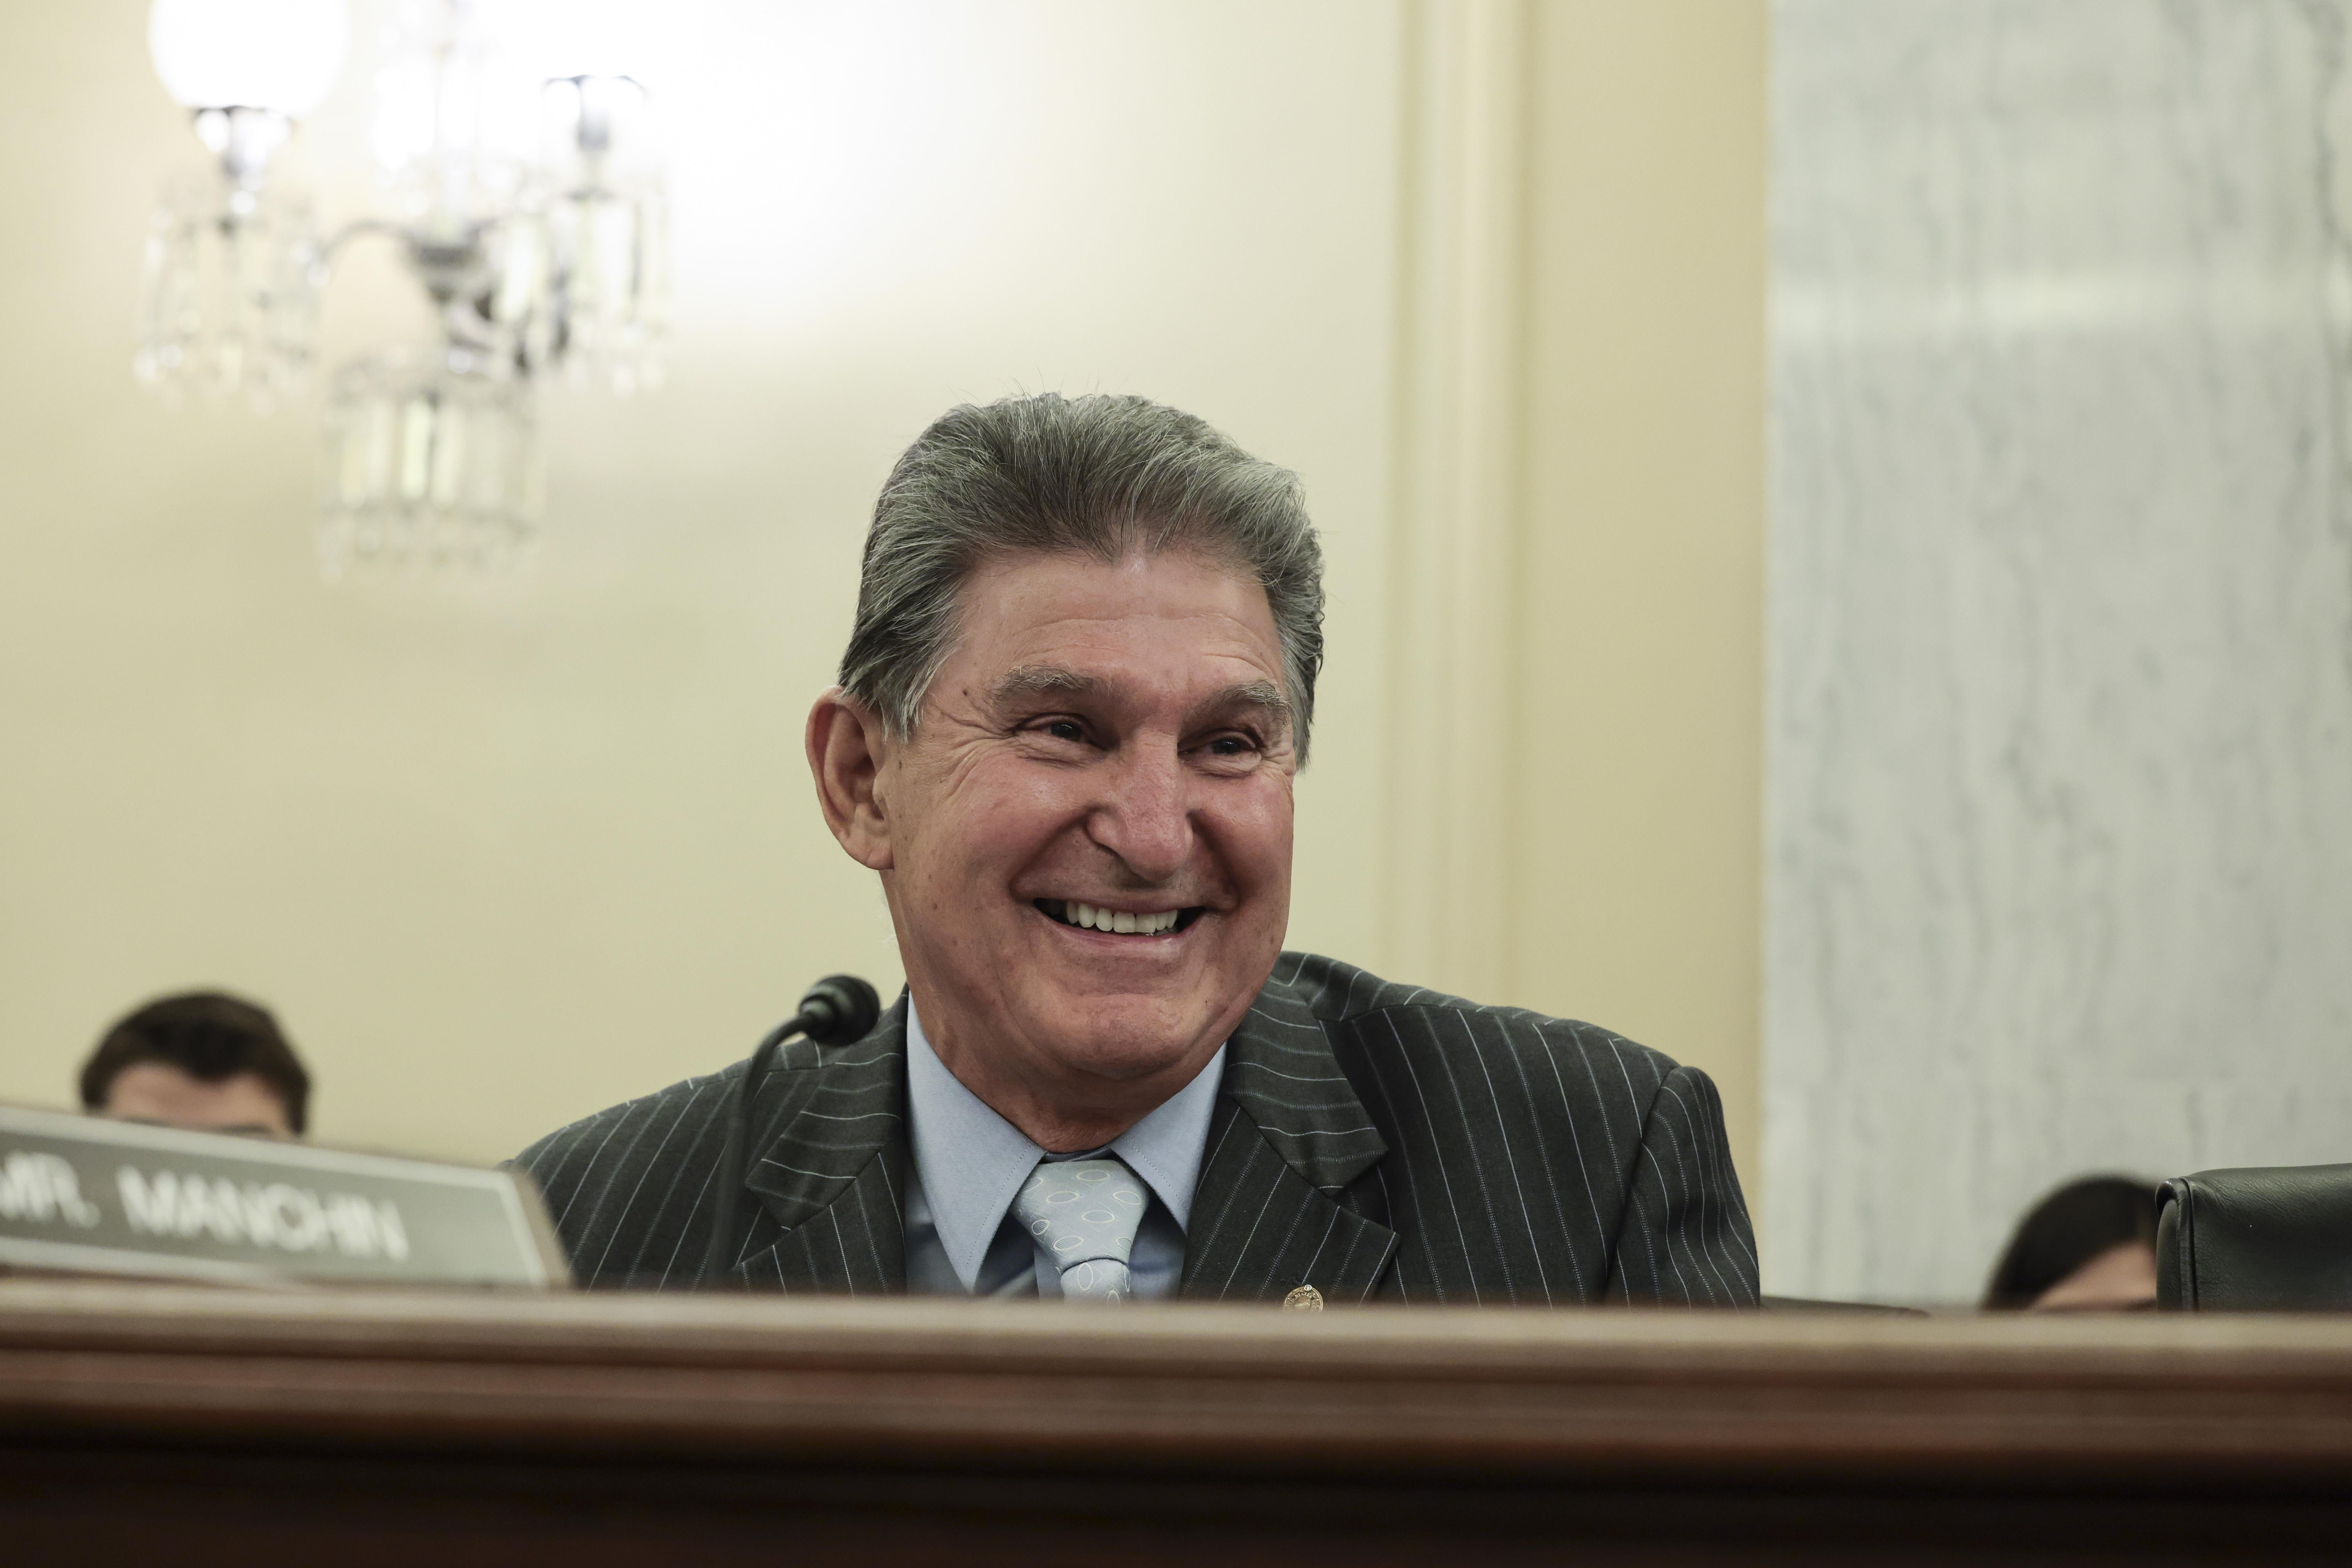 Joe Manchin sits smiling at a table with a nameplate reading "Mr. Manchin."